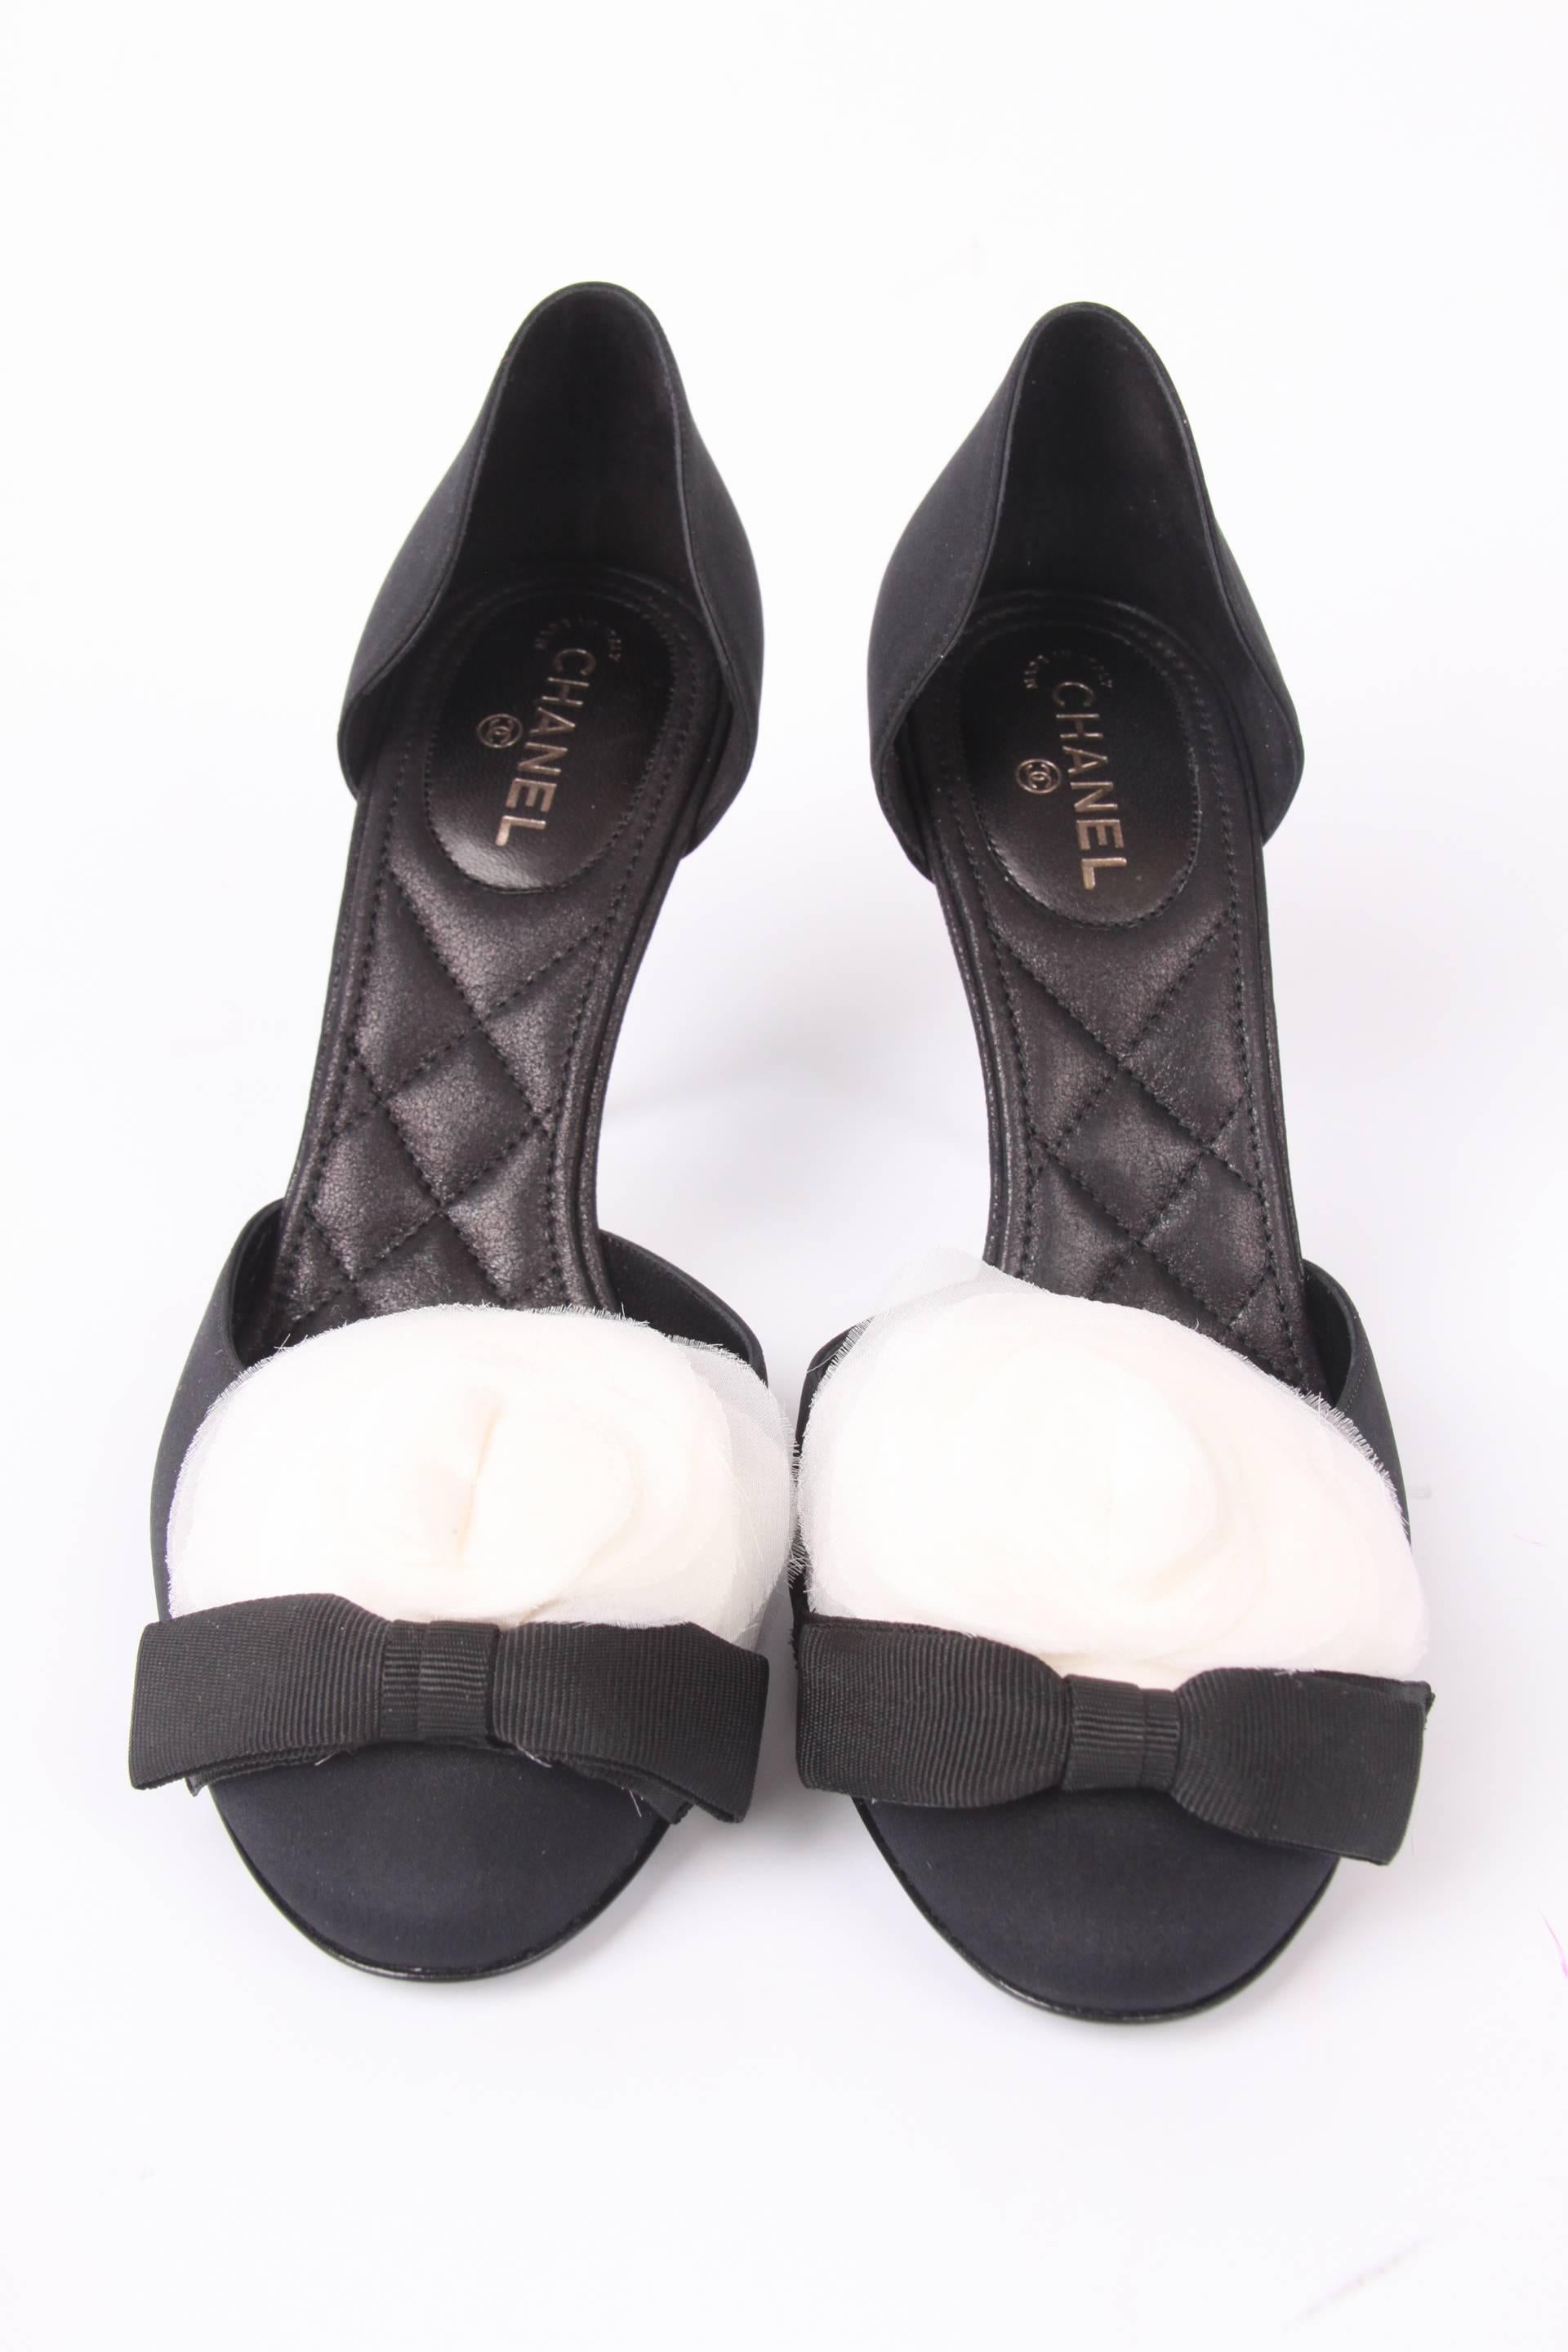 Utterly stunning are these Chanel heels in black satin, a white camellia flower on the toe.

This pair is from the collection of 2005-2006, but they are new and never been worn before, still in their original box. The sole and heel are undamaged,